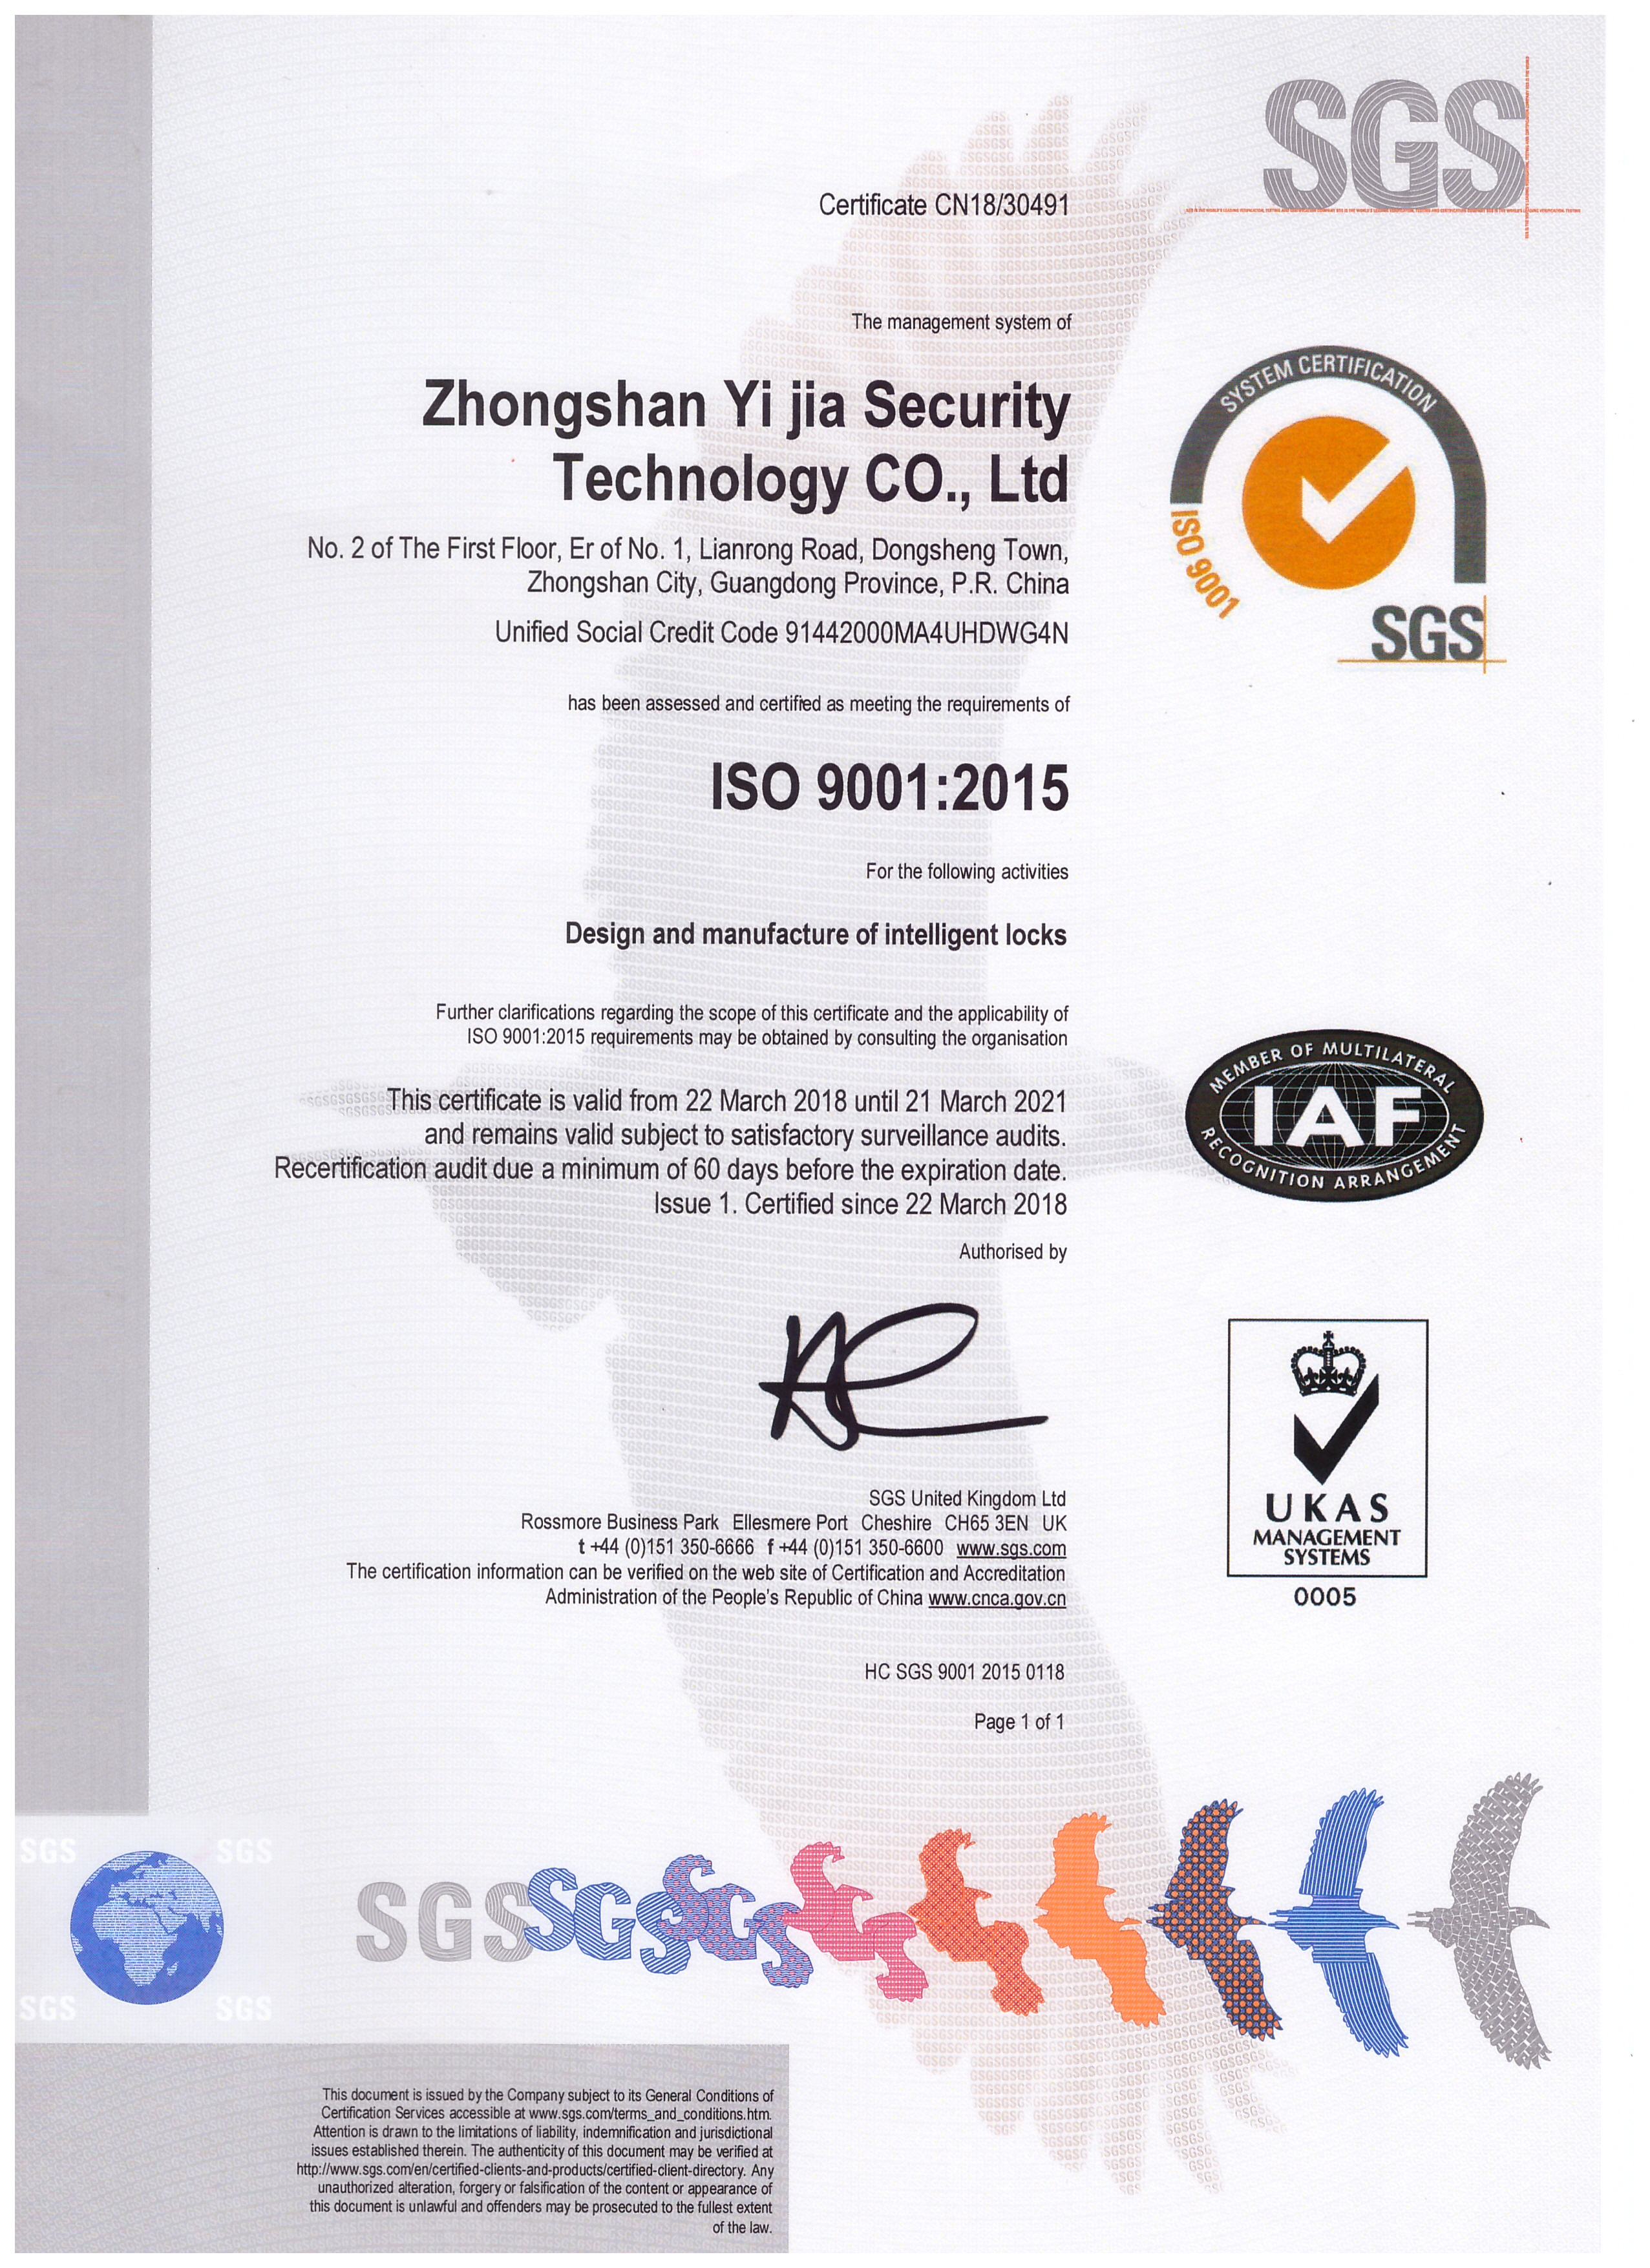 Congratulations! Our ISO 9001:2015 system just Approved!